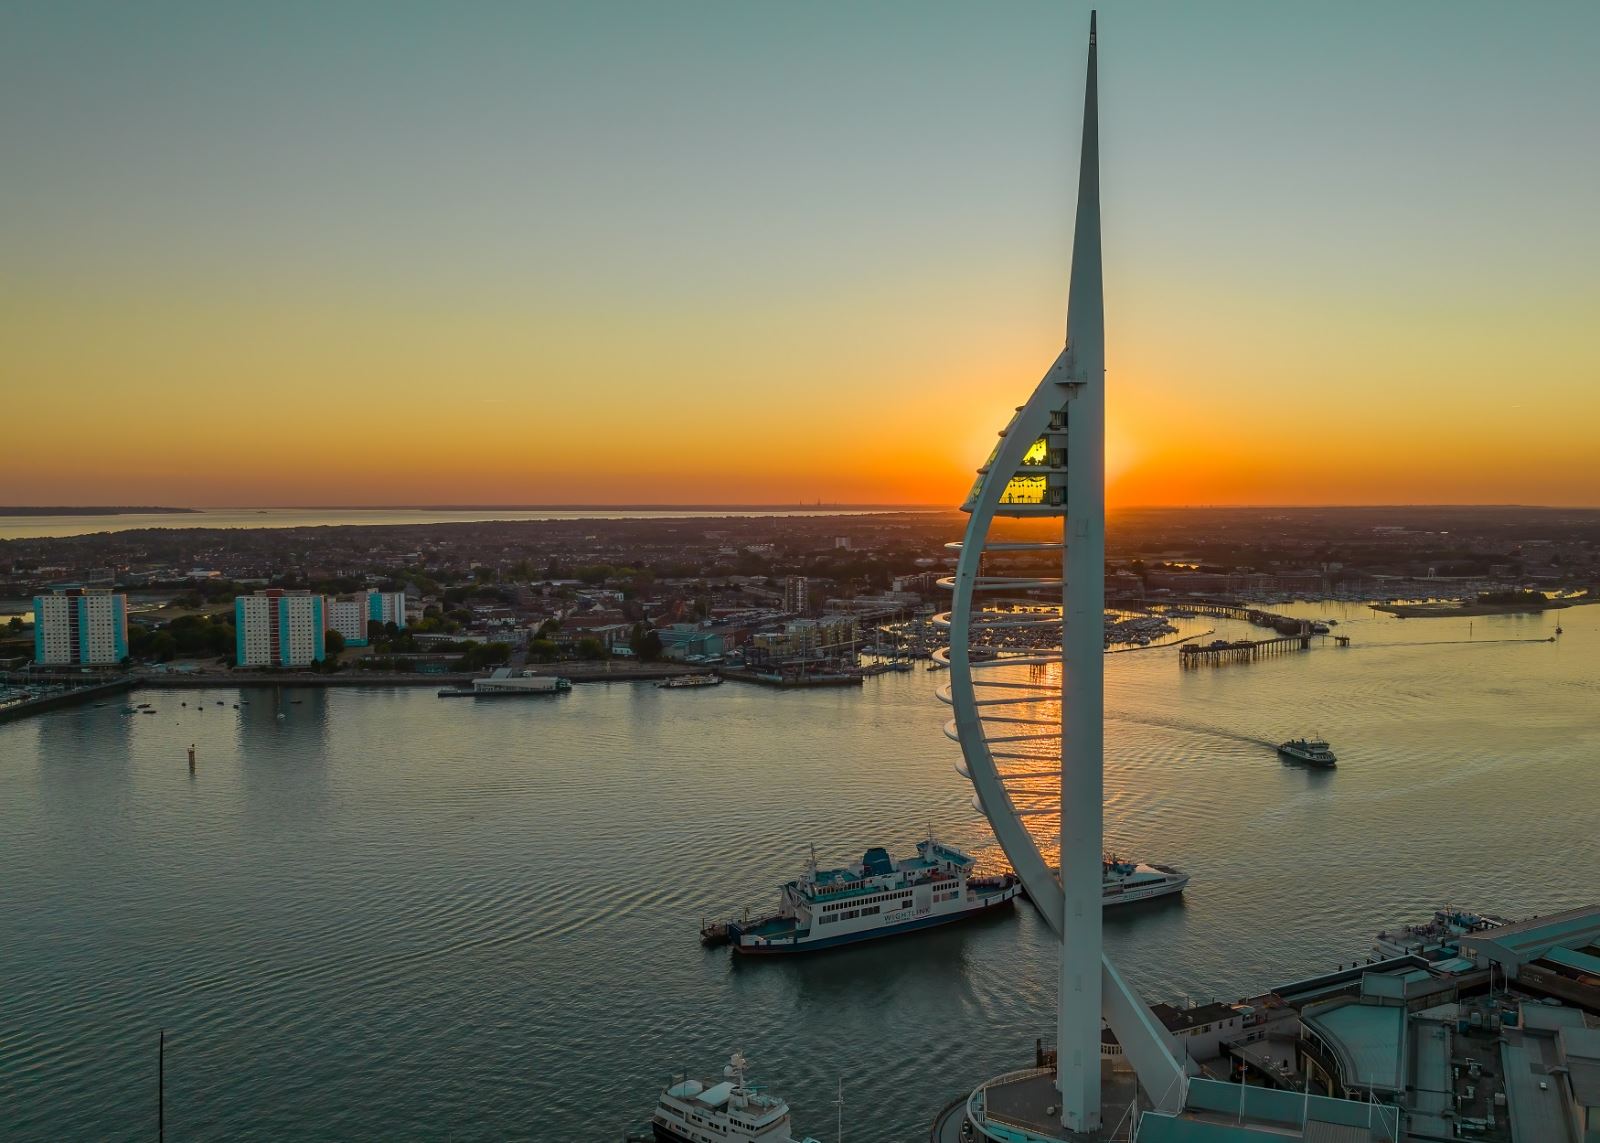 The Spinnaker Tower at sunset